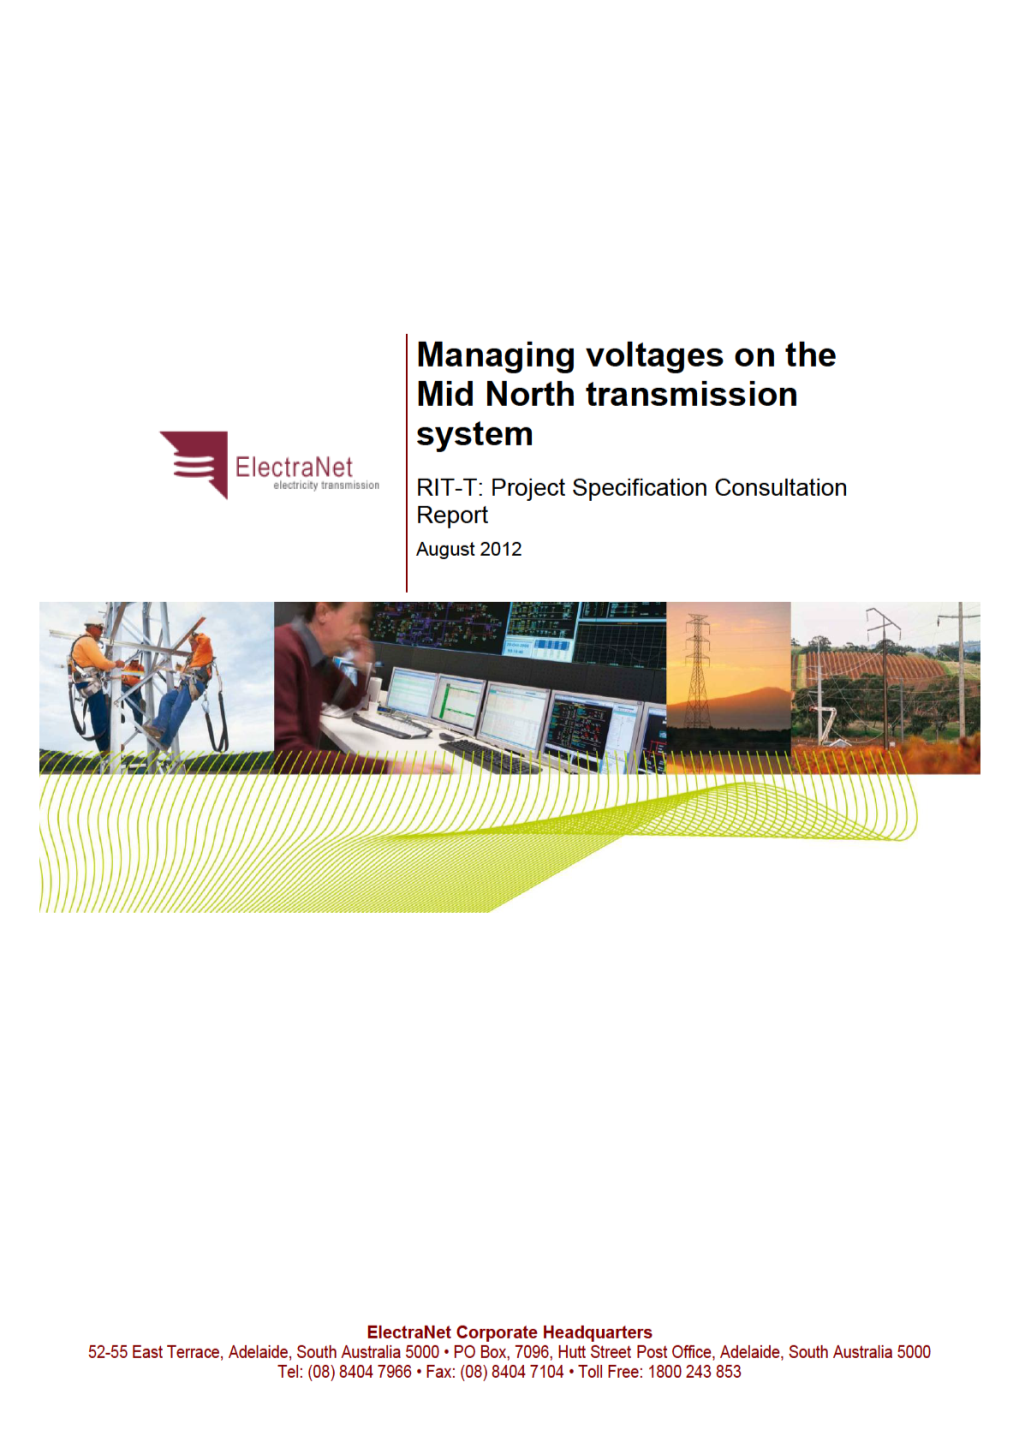 Managing Voltages on the Mid North Transmission System